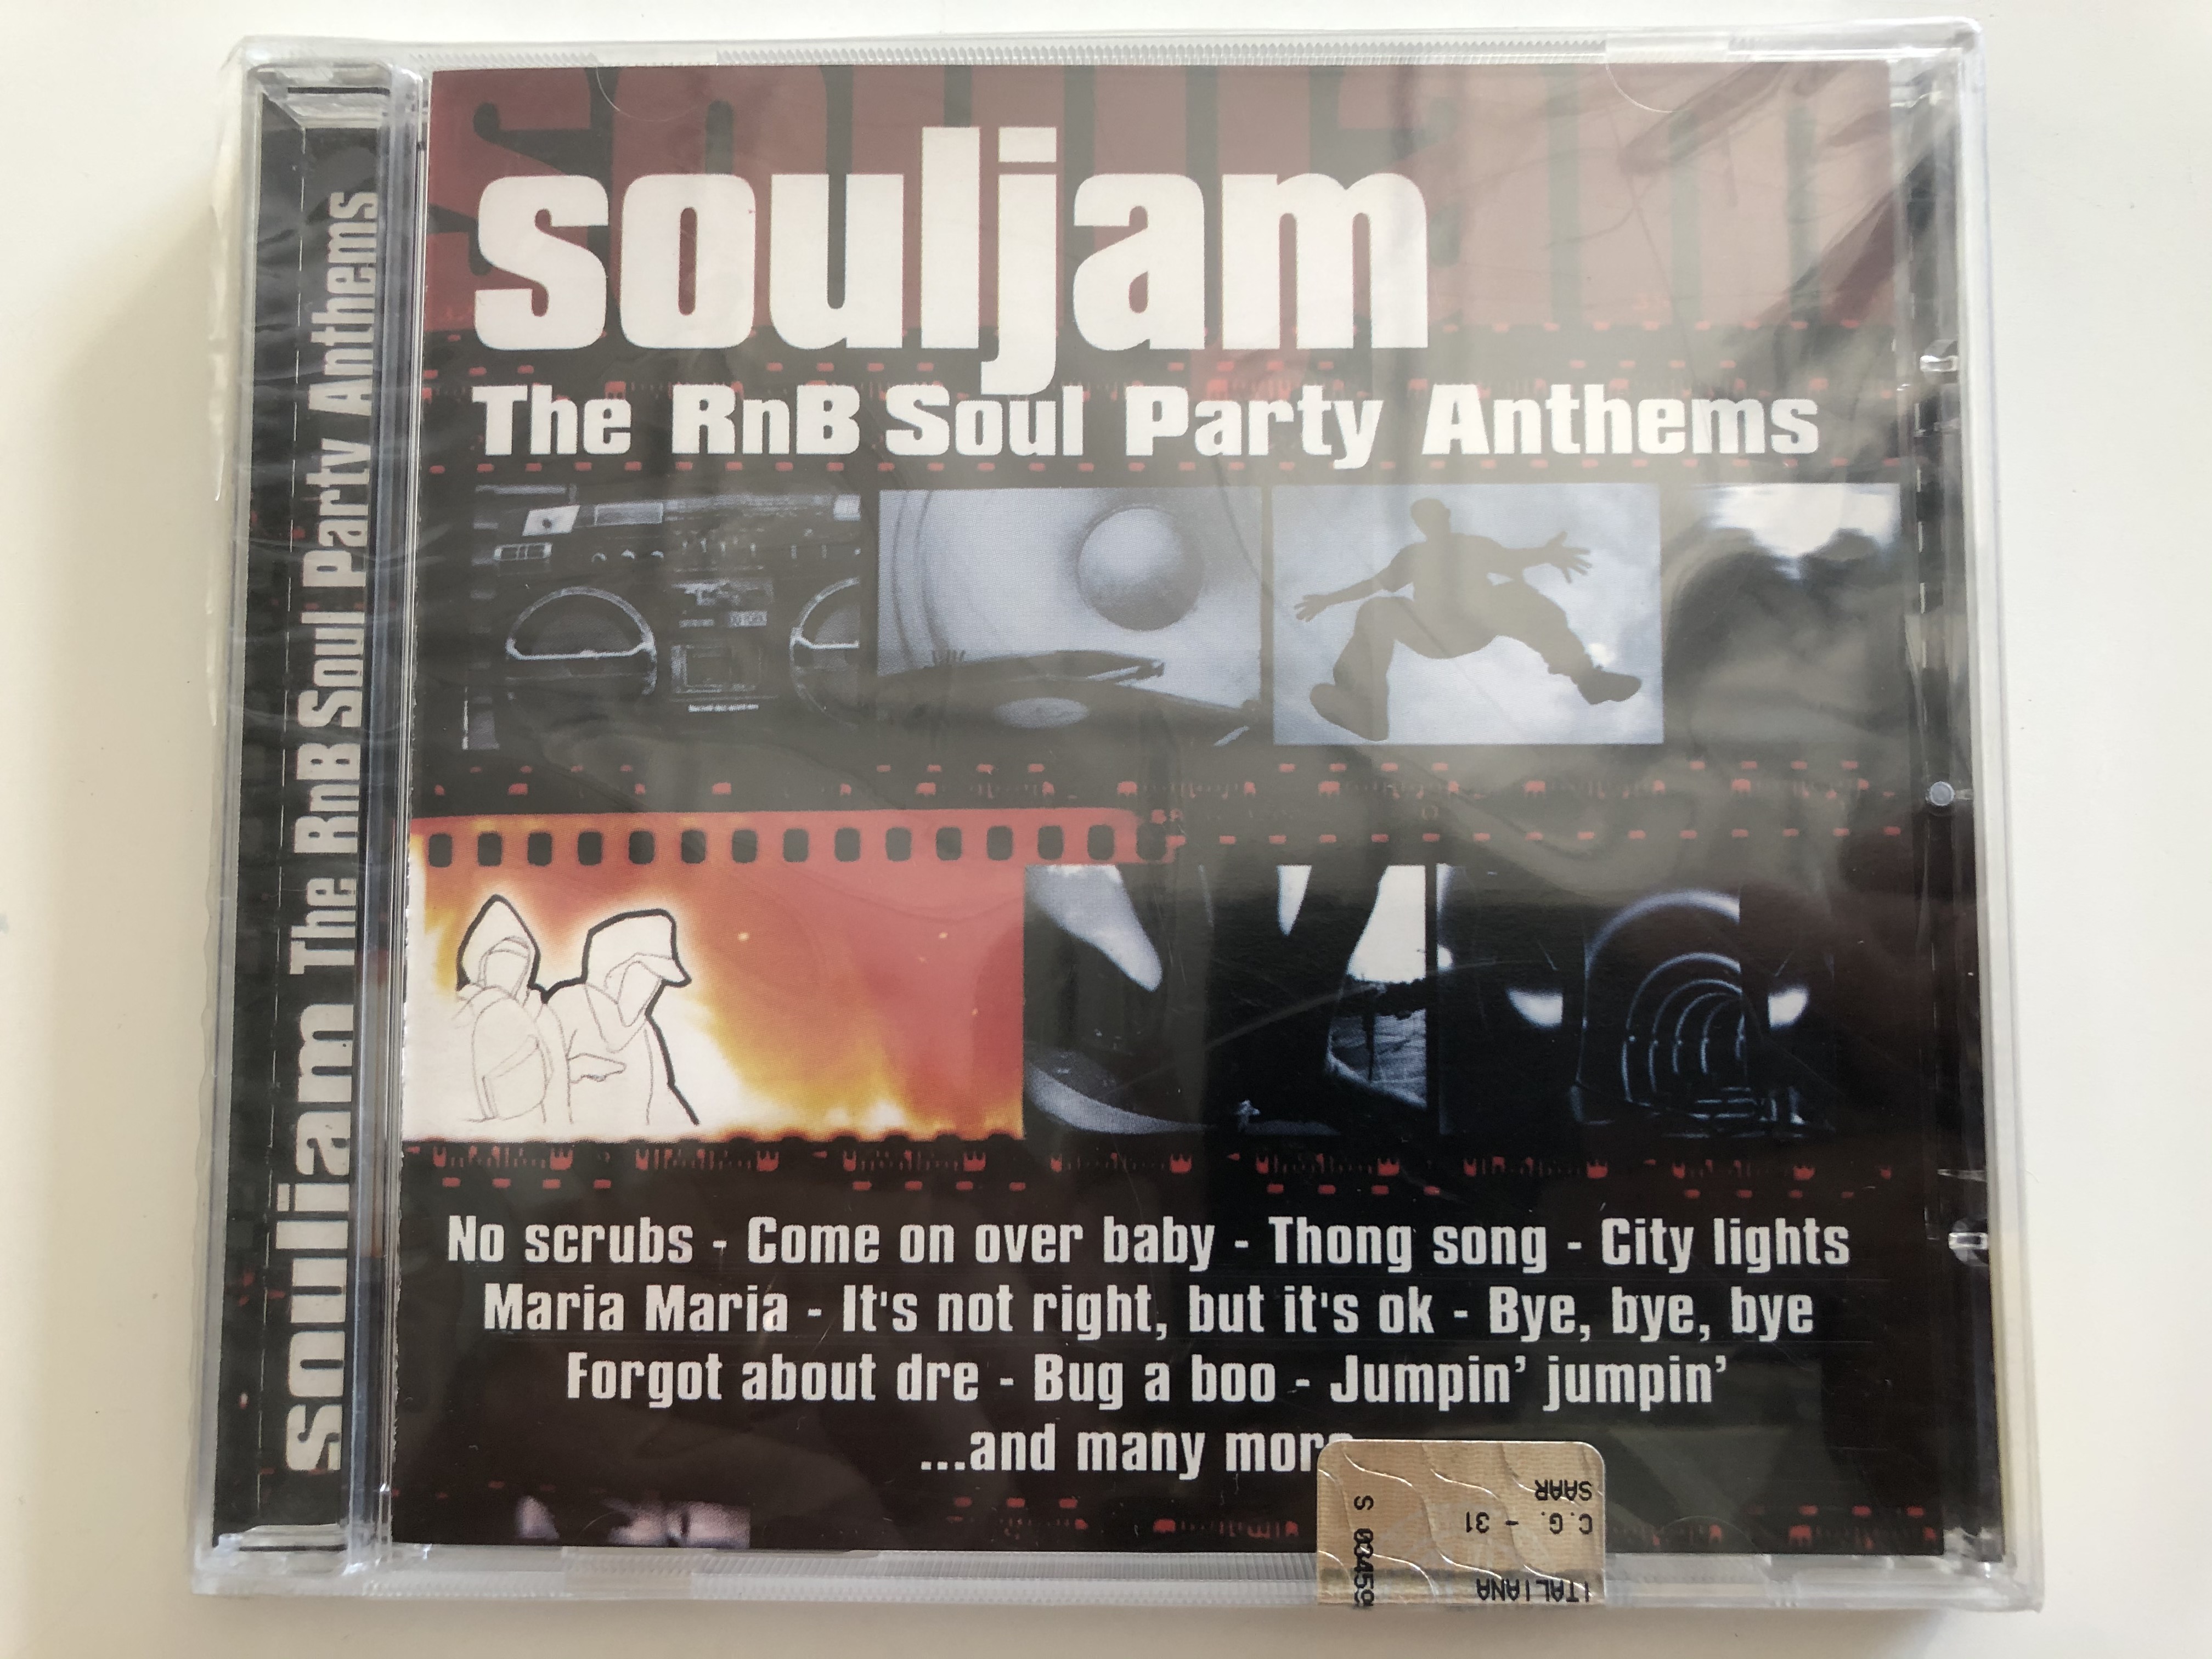 souljam2-the-rnb-soul-party-anthems-no-scrubs-come-on-over-baby-thong-song-city-lights-maria-maria-it-s-not-right-but-it-s-oke-bye-bye-bye-forgot-about-dre-bug-a-boo-jumpin-jumpin-a-1-.jpg